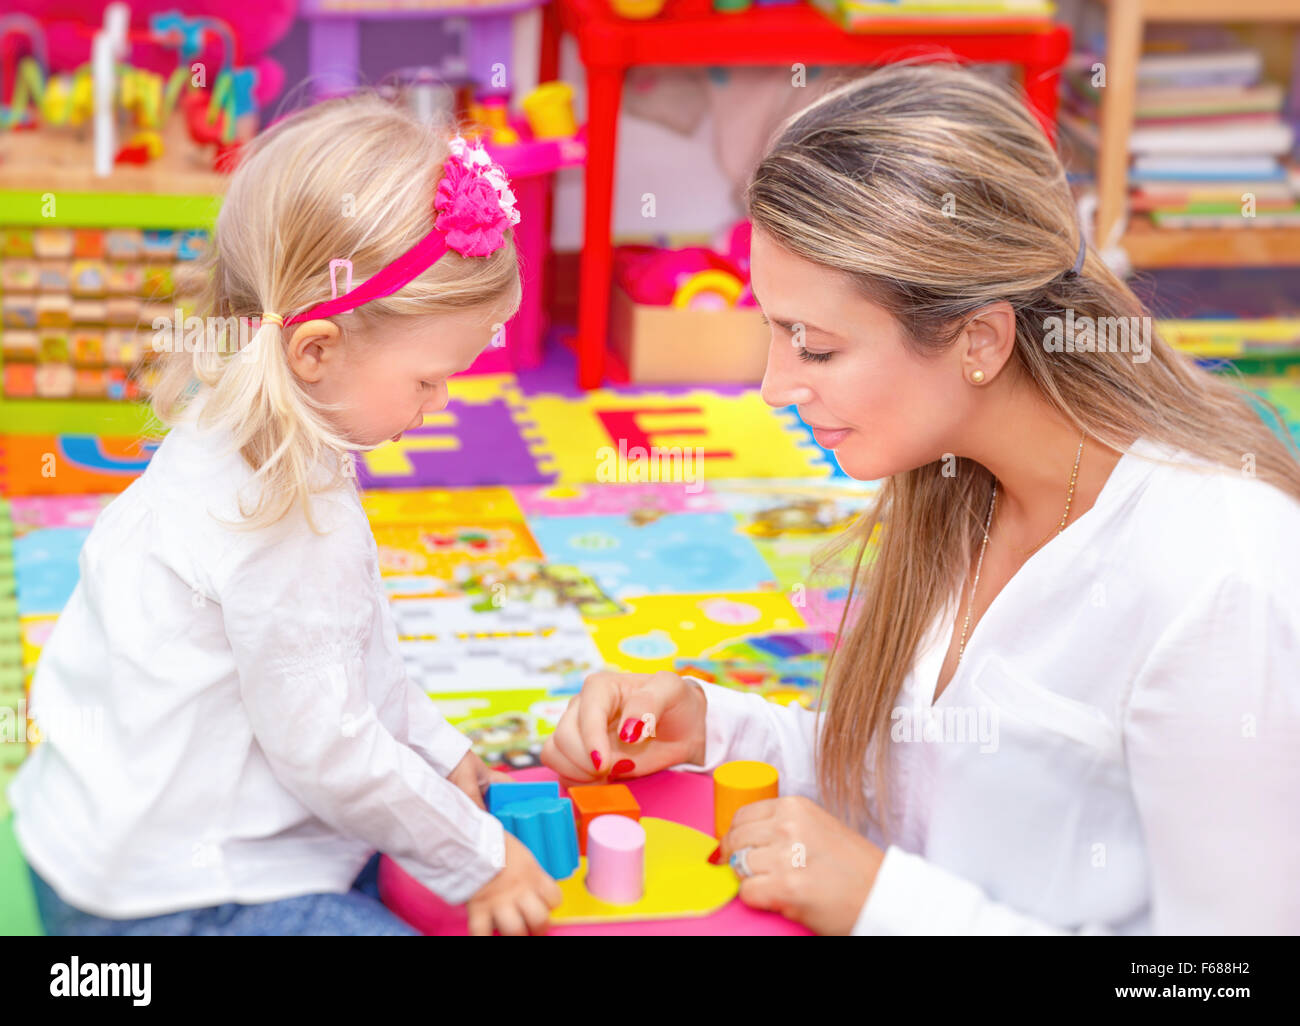 Cute little girl with young beautiful mother playing game in colorful playroom, happy family with pleasure spending time Stock Photo